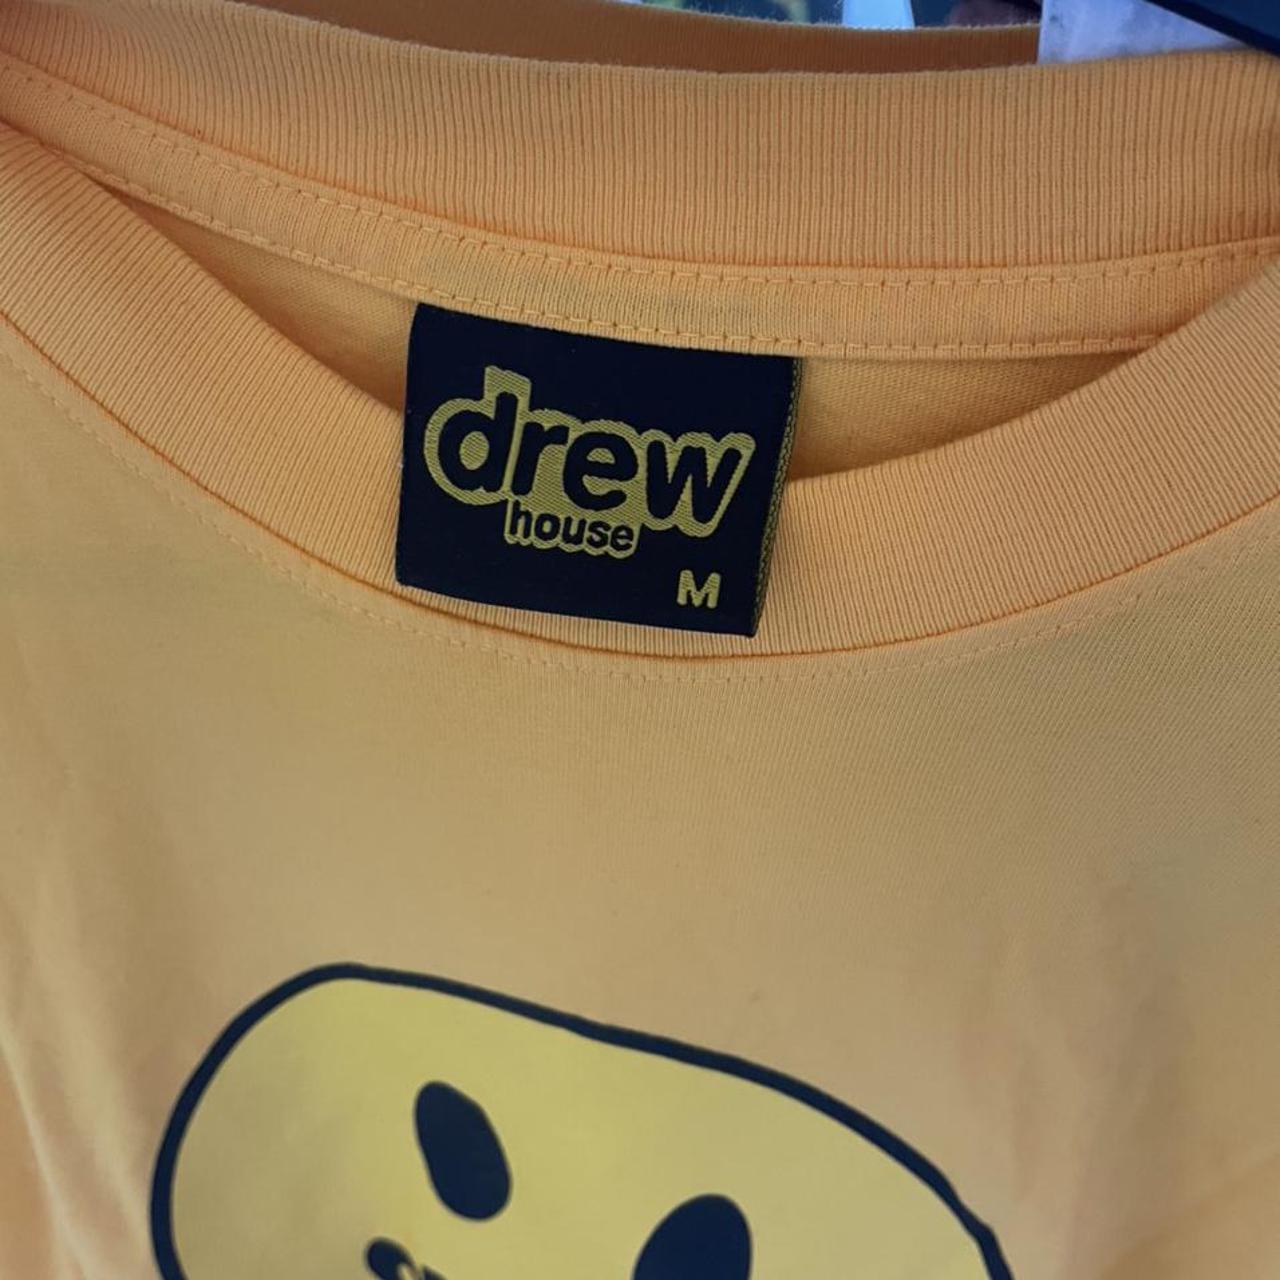 Product Image 2 - Drew house smiley tee

Authentic size